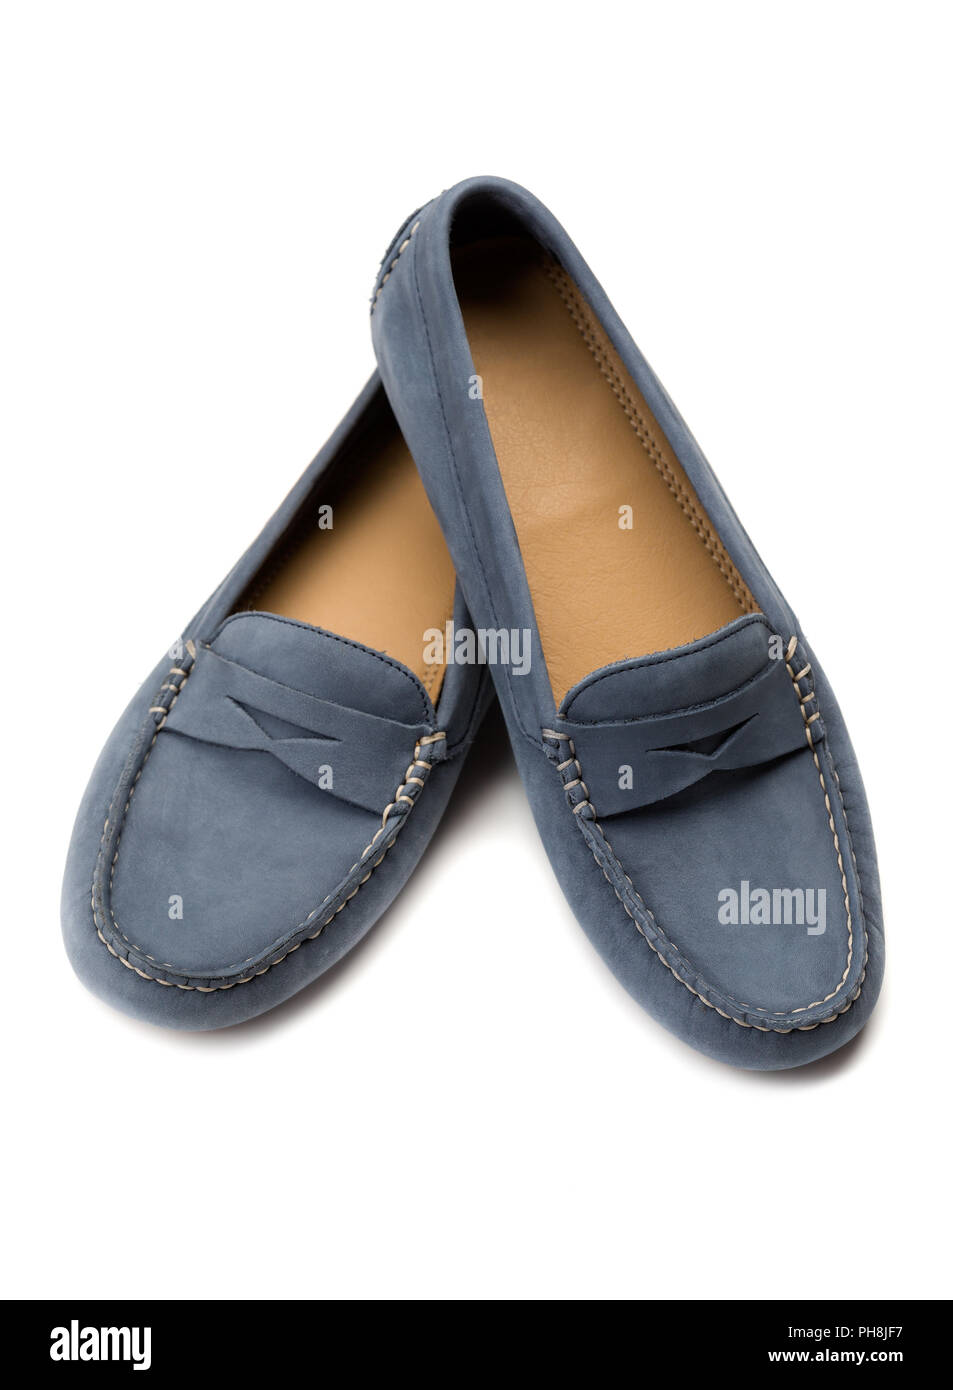 Blue suede shoes. Stock Photo